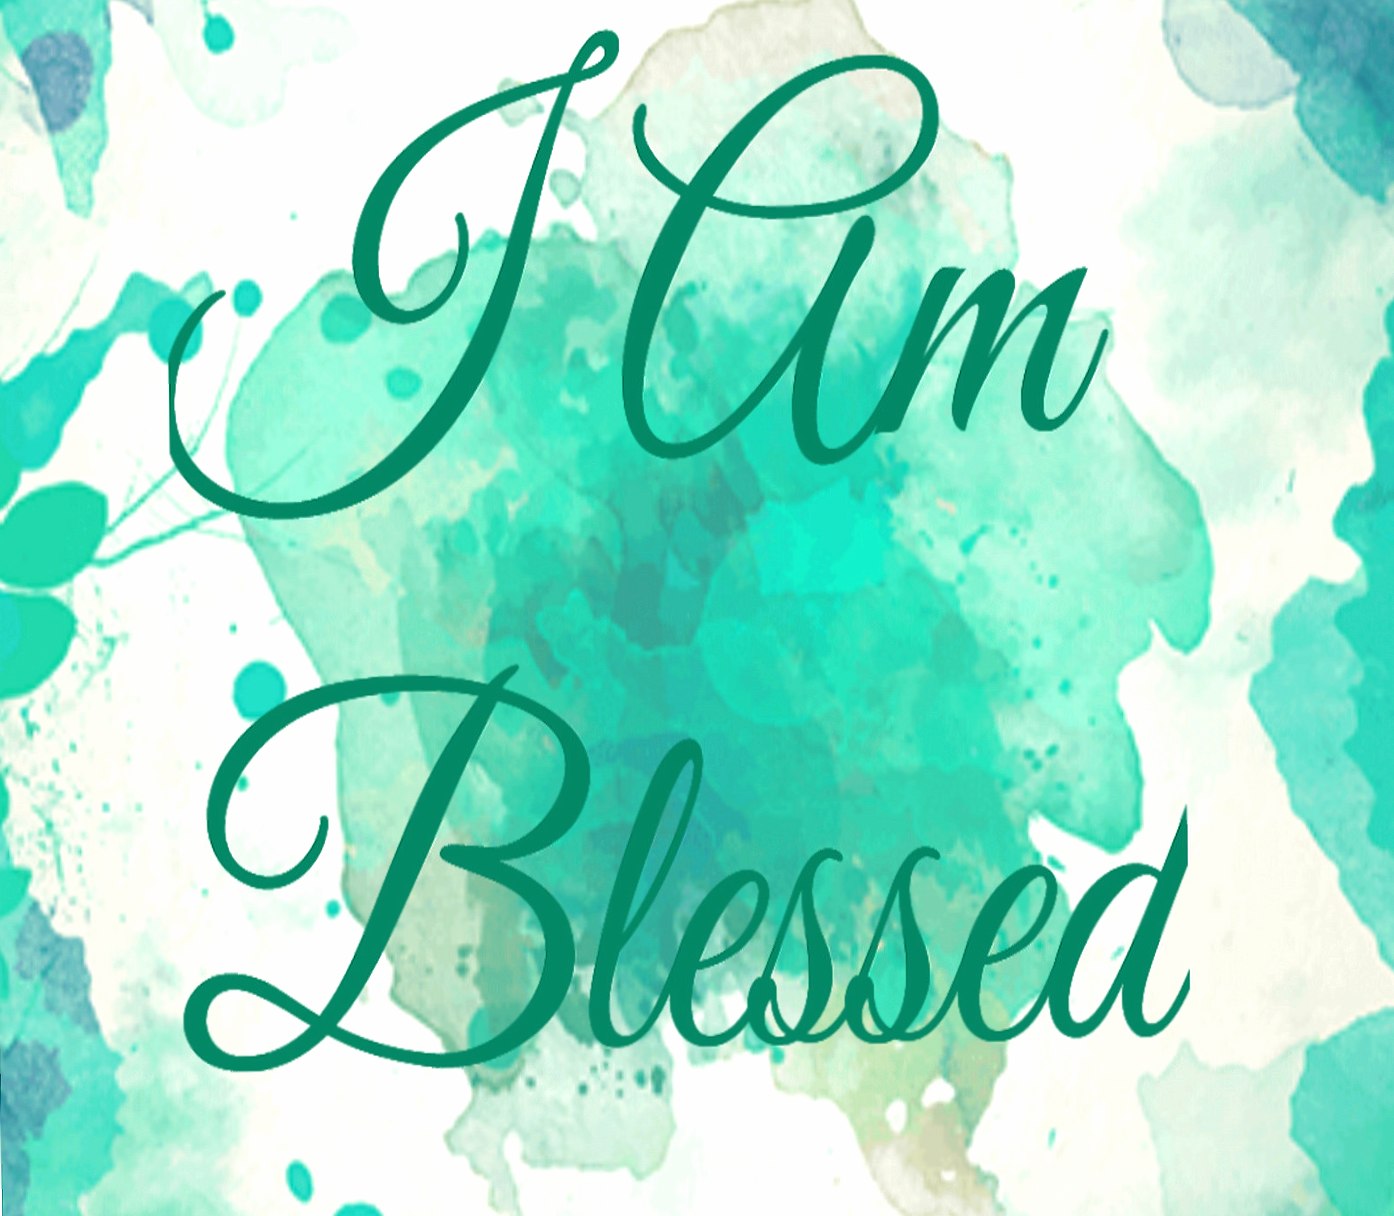 Blessings Wallpaper HD Poster Background